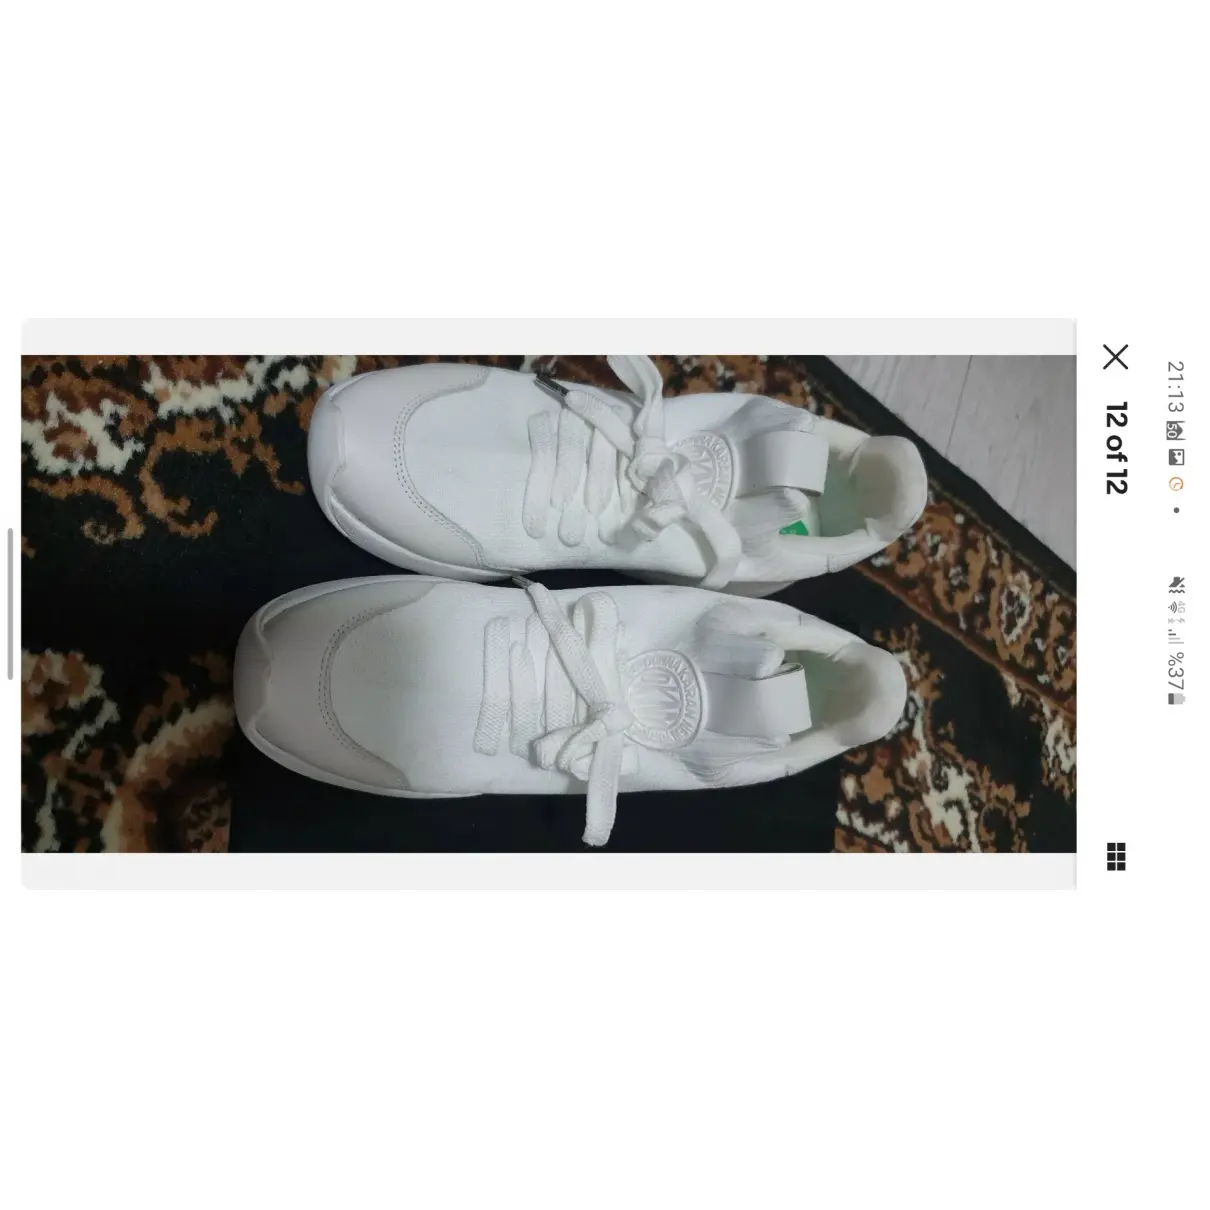 Buy Dkny Cloth trainers online